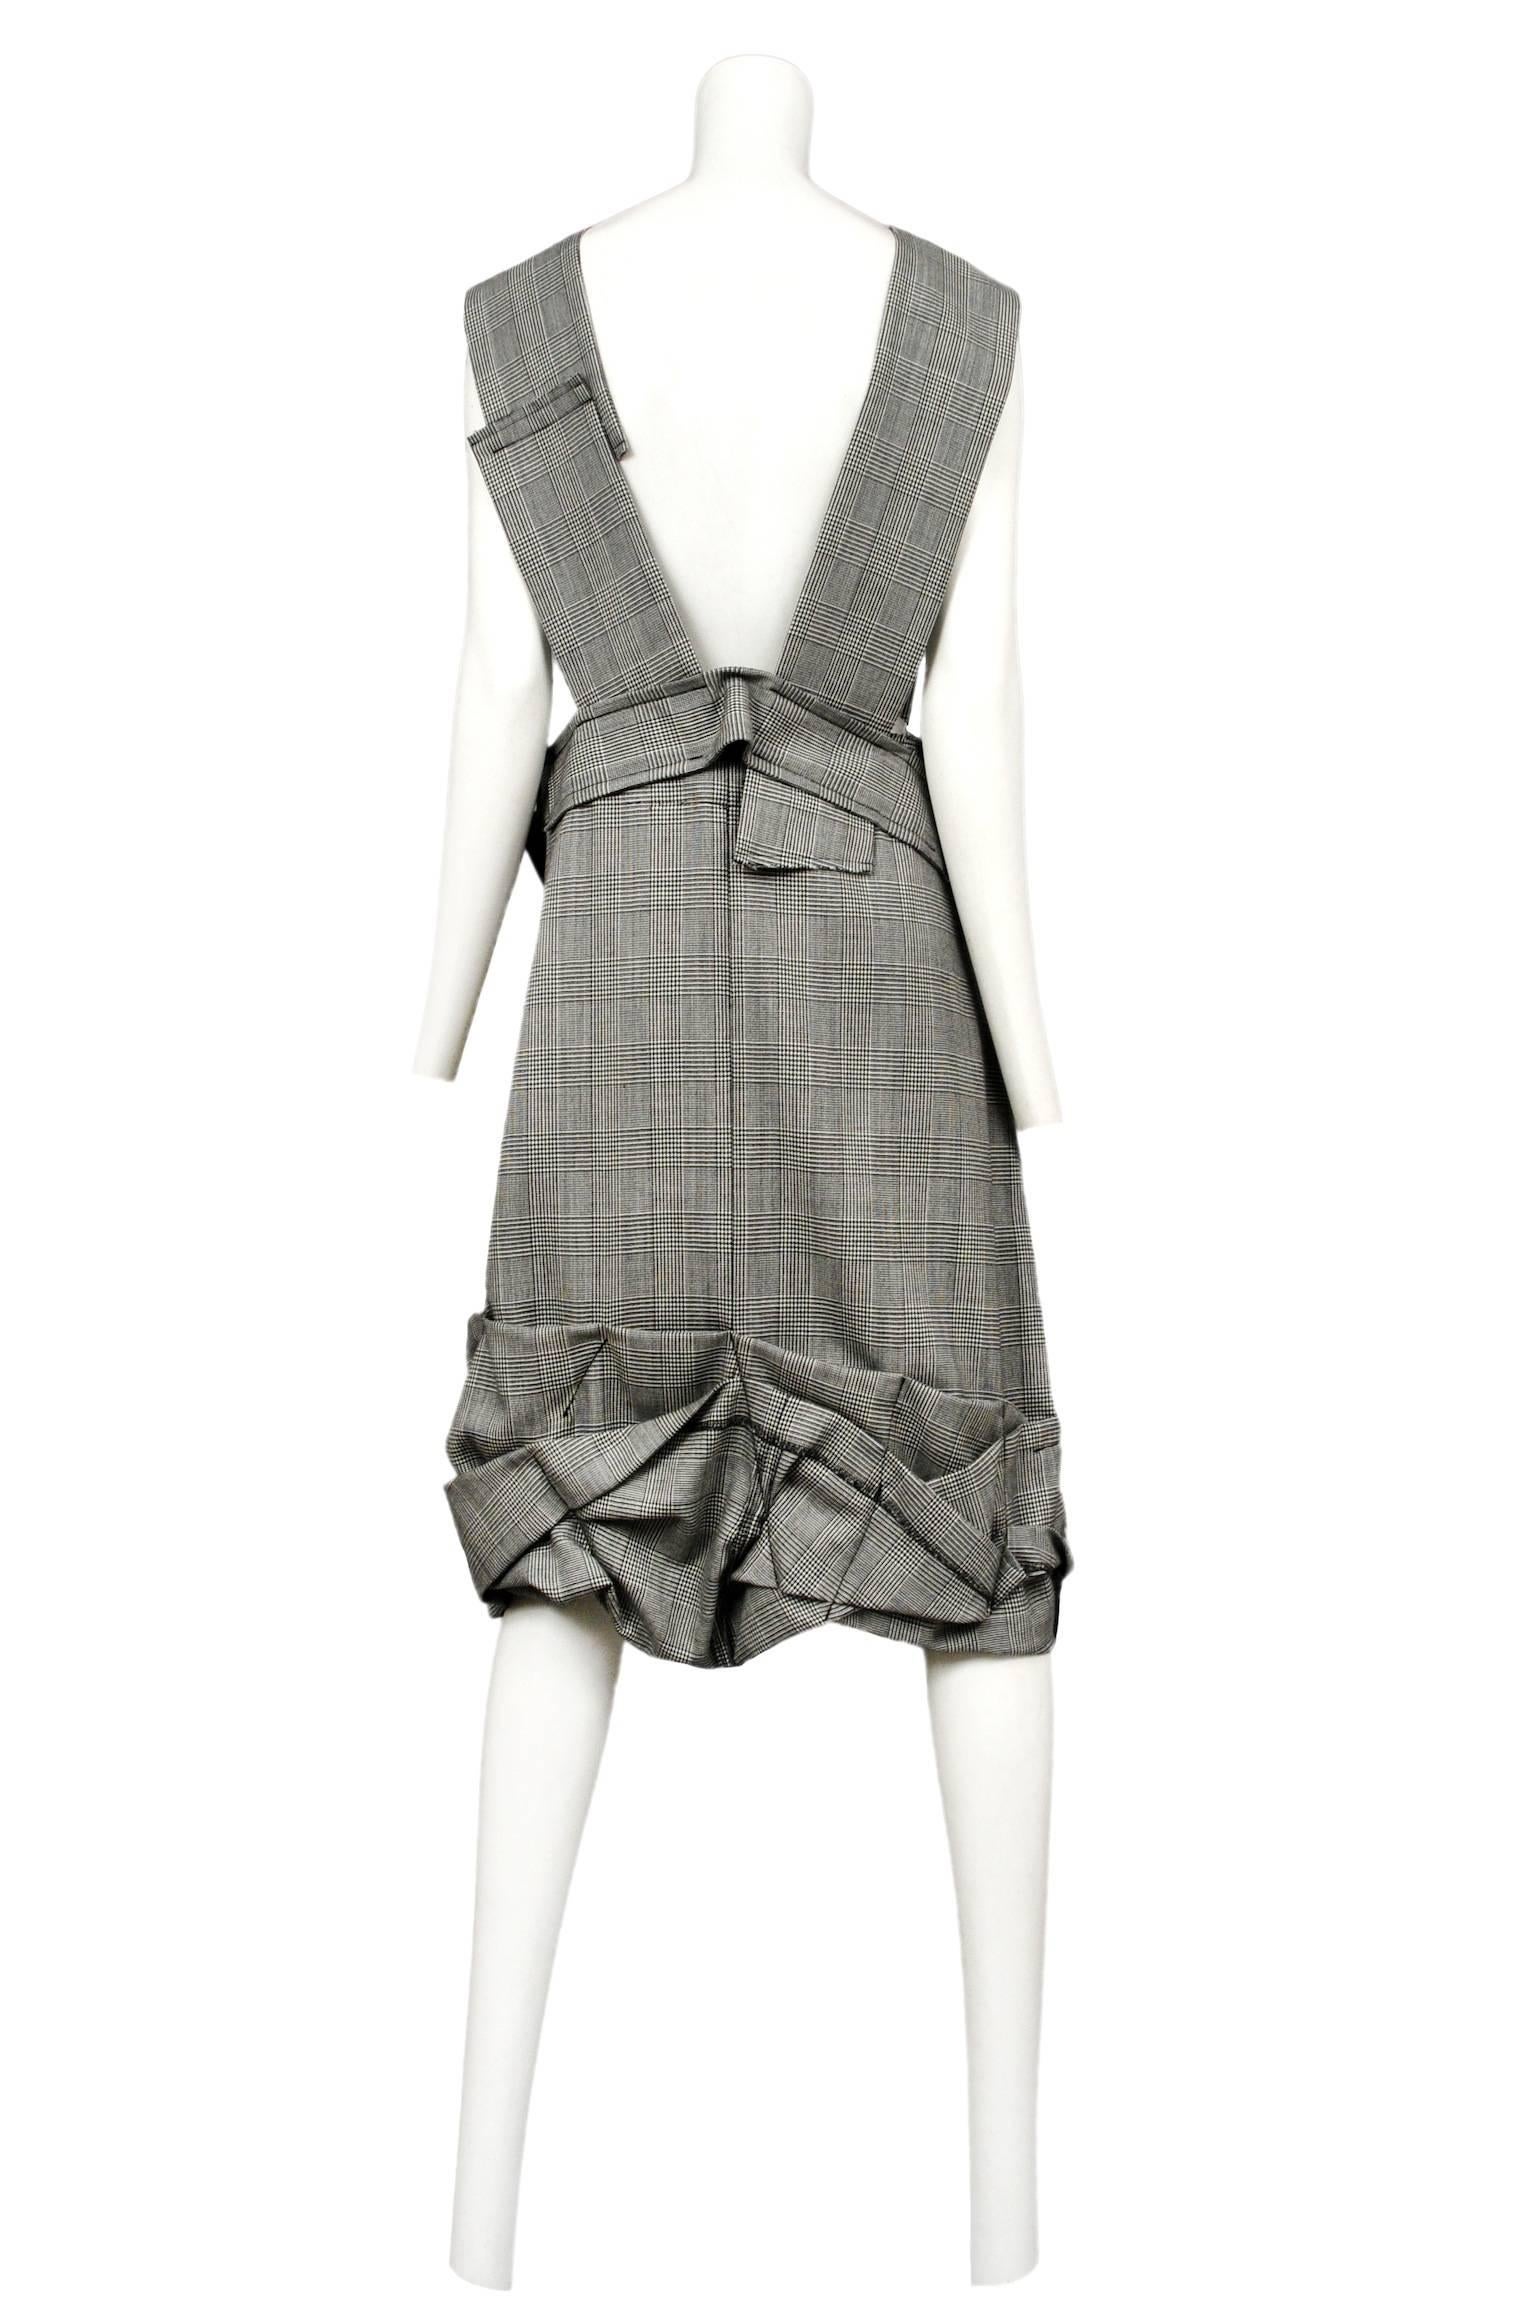 Vintage Comme des Garcons black and white check knee length dress featuring an apron style bodice, and ornate stitched down pleating at the waist and hem.

Please email us for additional photos.